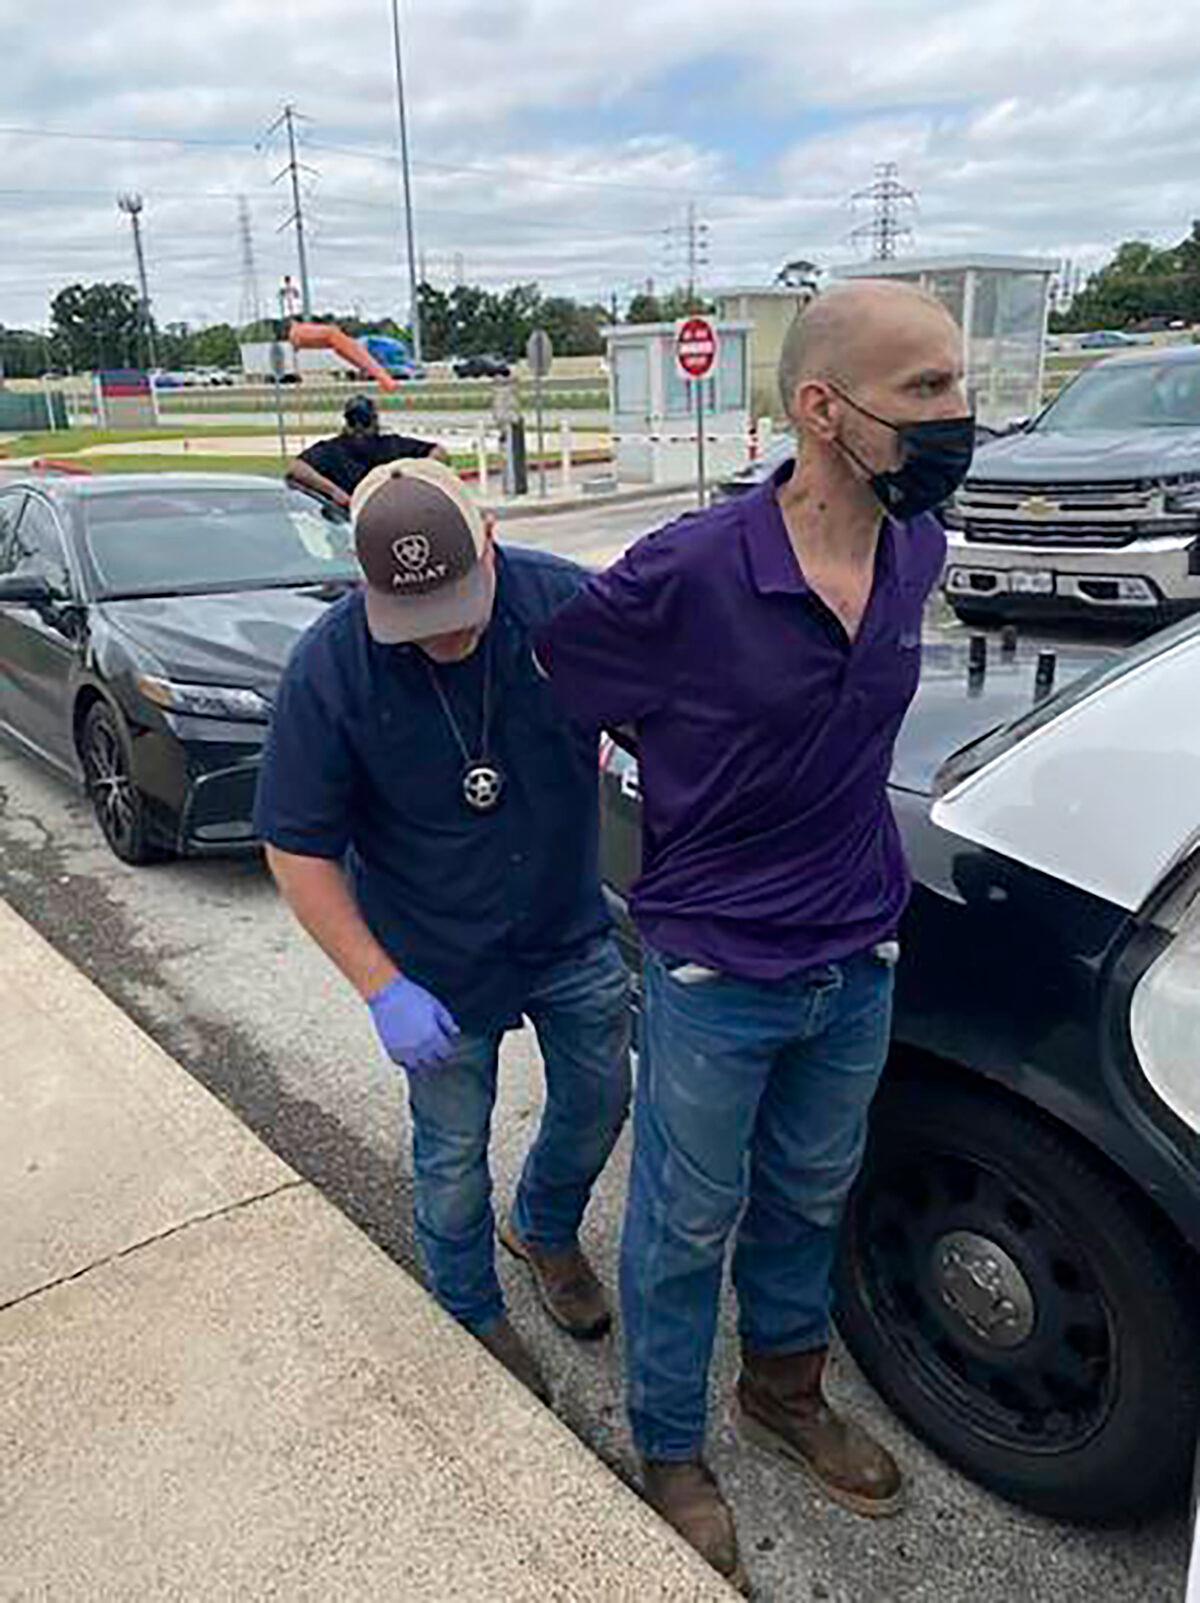 This image provided by the Hinds County Sheriff's Office shows Jerry Raynes, who was apprehended in Spring Valley, Texas days after he and three other inmates escaped Saturday night from the Raymond Detention Center near Jackson, Mississippi's capital. (Hinds County Sheriff's Office via AP)